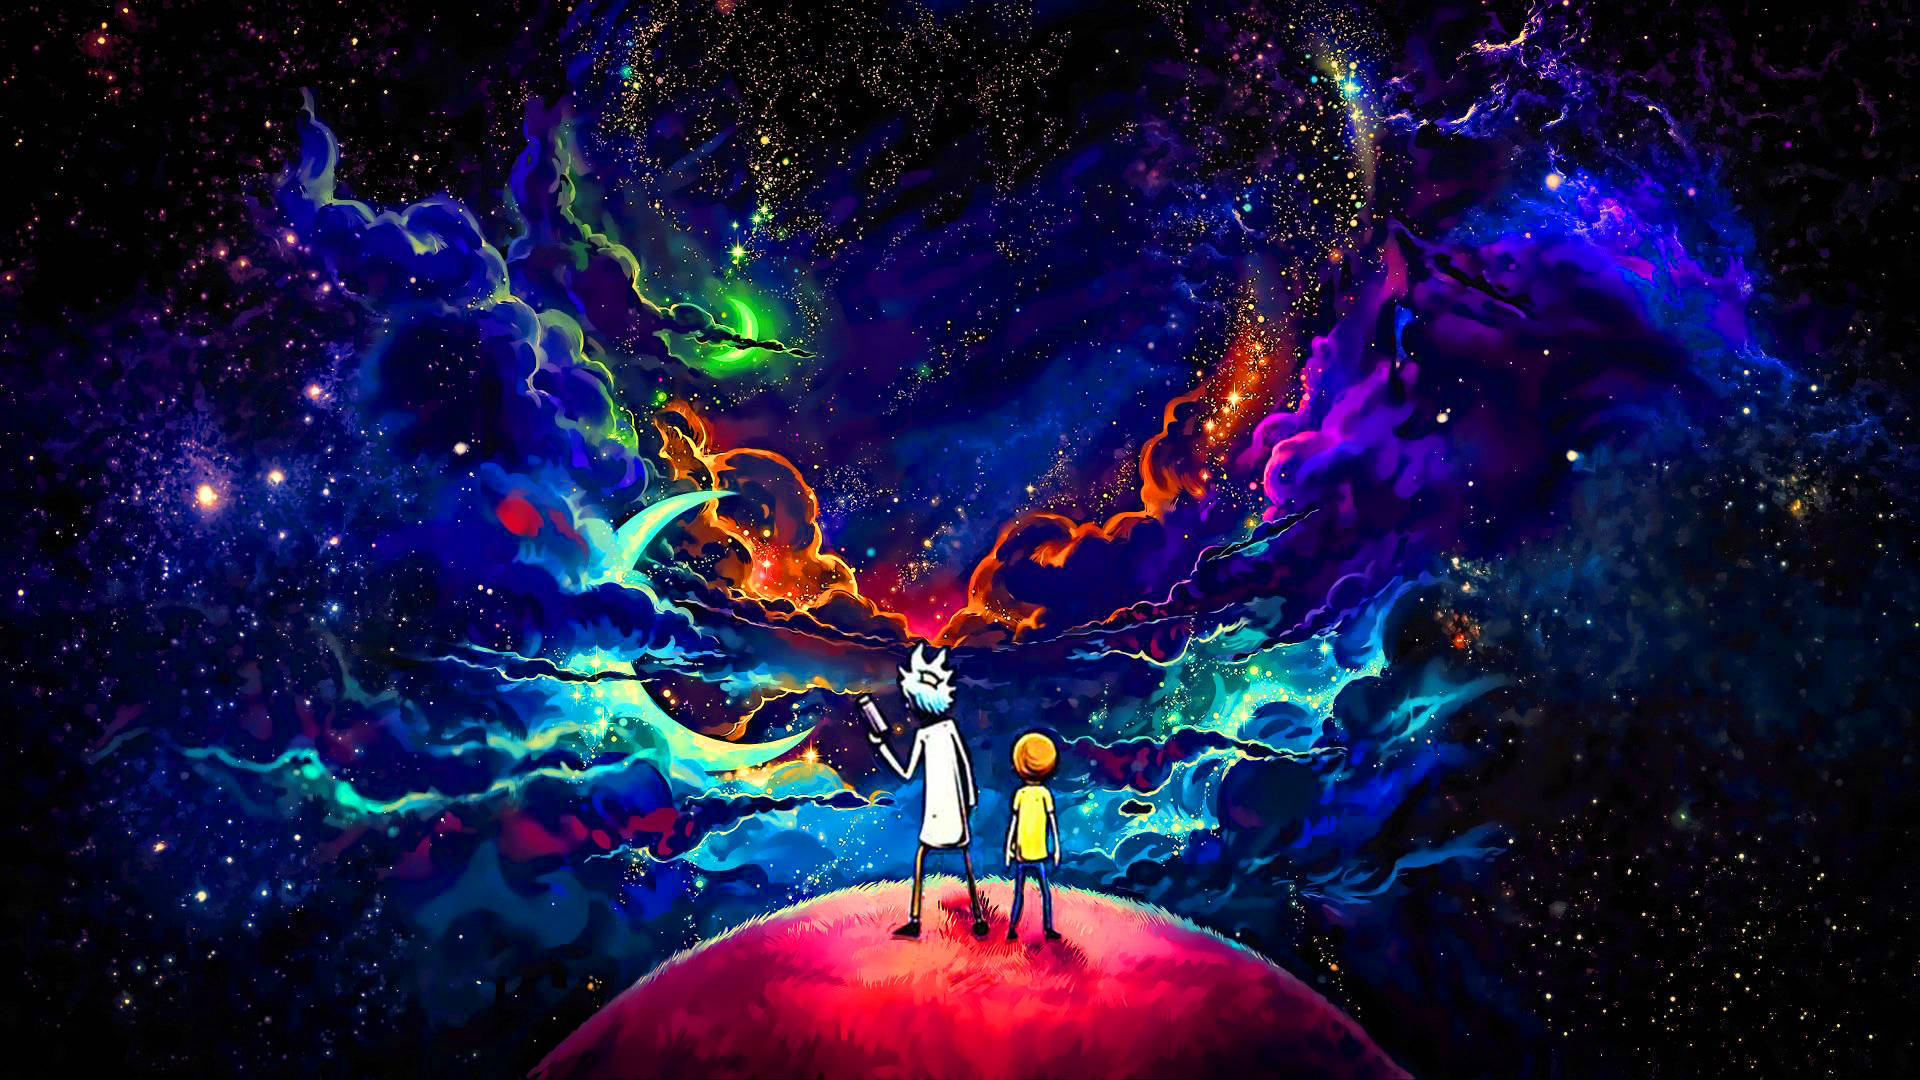 Dope Digital Galaxy In Rick And Morty